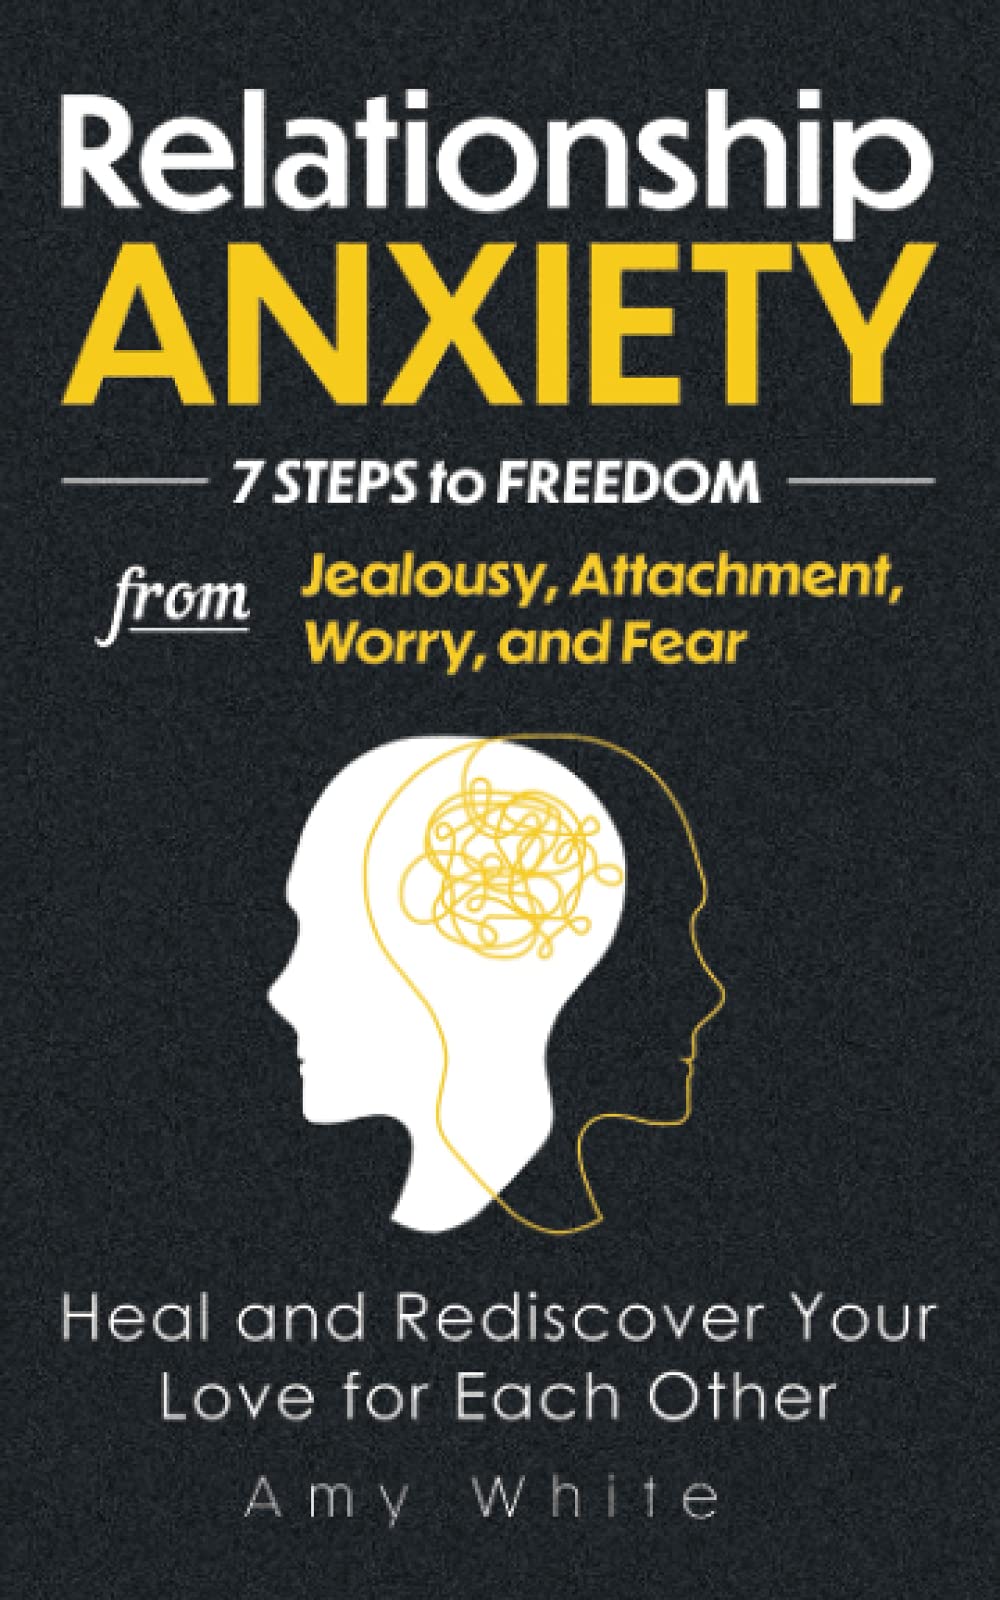 Relationship Anxiety: 7 Steps to Freedom from Jealousy, Attachment, Worry, and Fear – Heal and Rediscover Your Love for Each Other (Mindful Relationships)